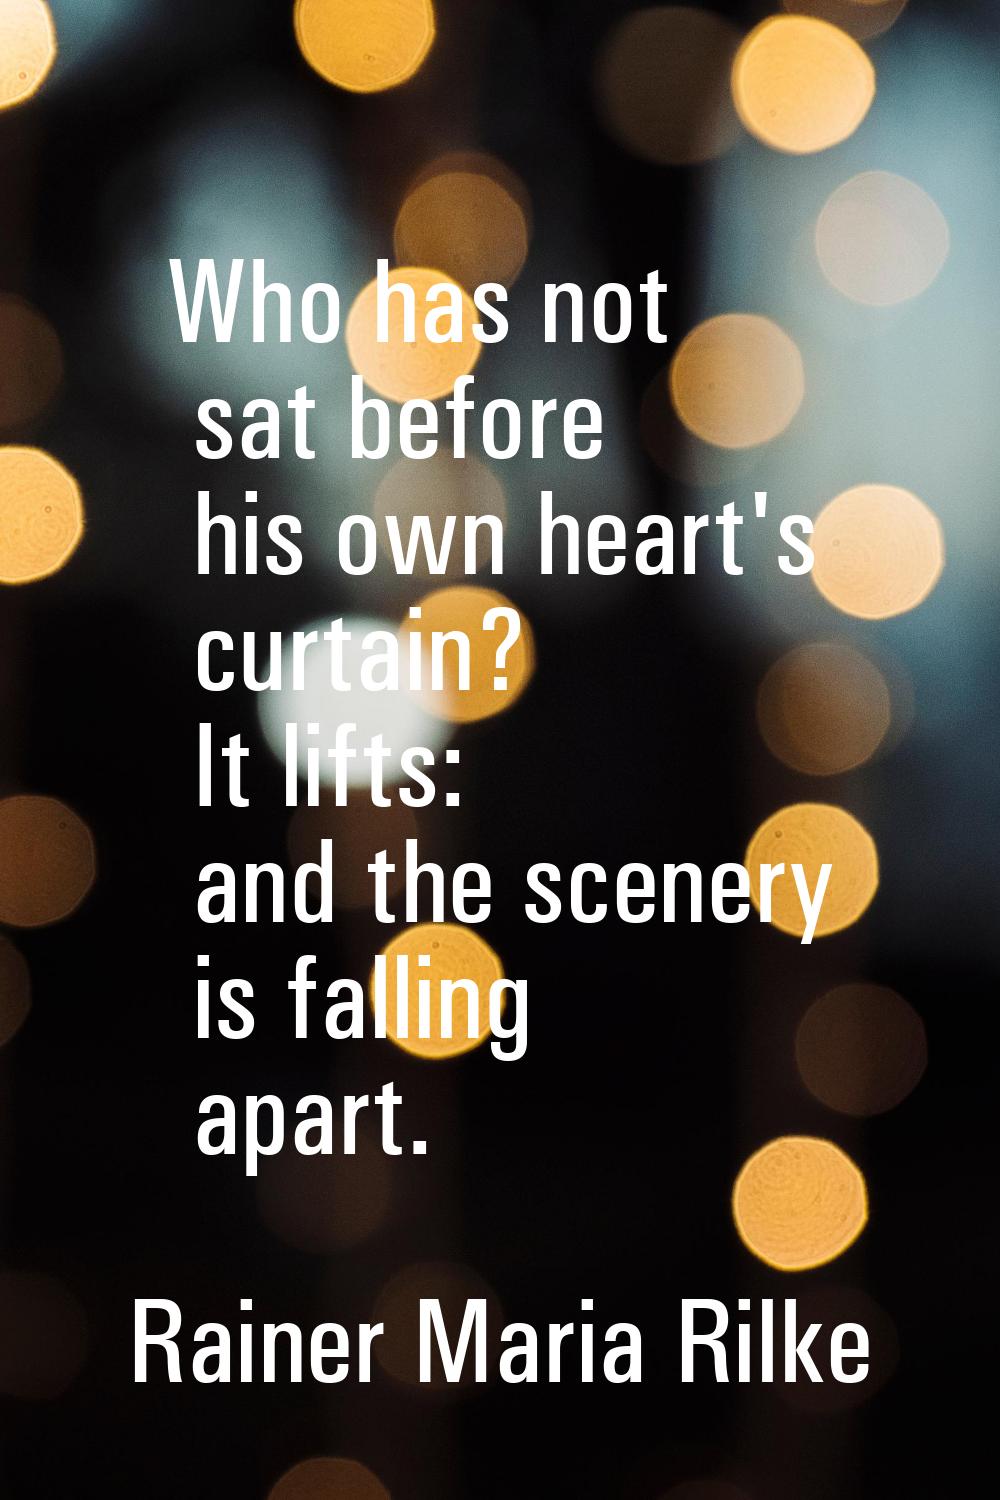 Who has not sat before his own heart's curtain? It lifts: and the scenery is falling apart.